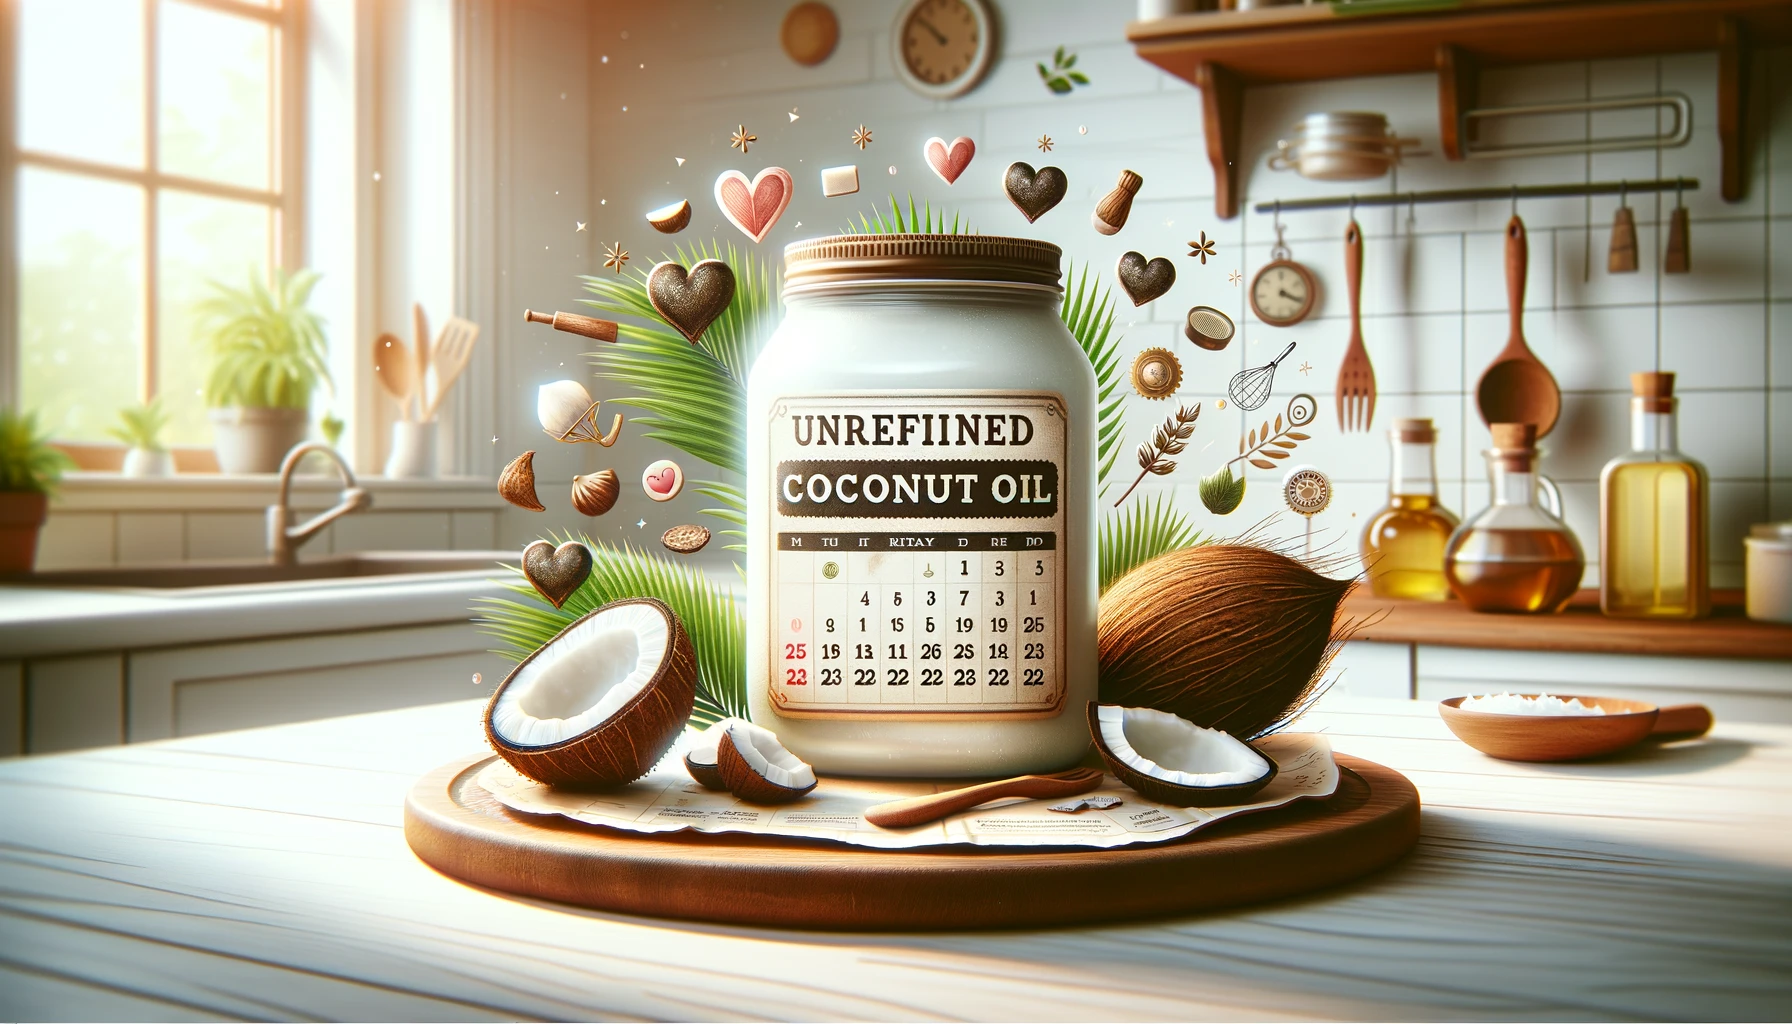 blog featured image designed for the post about unrefined coconut oil